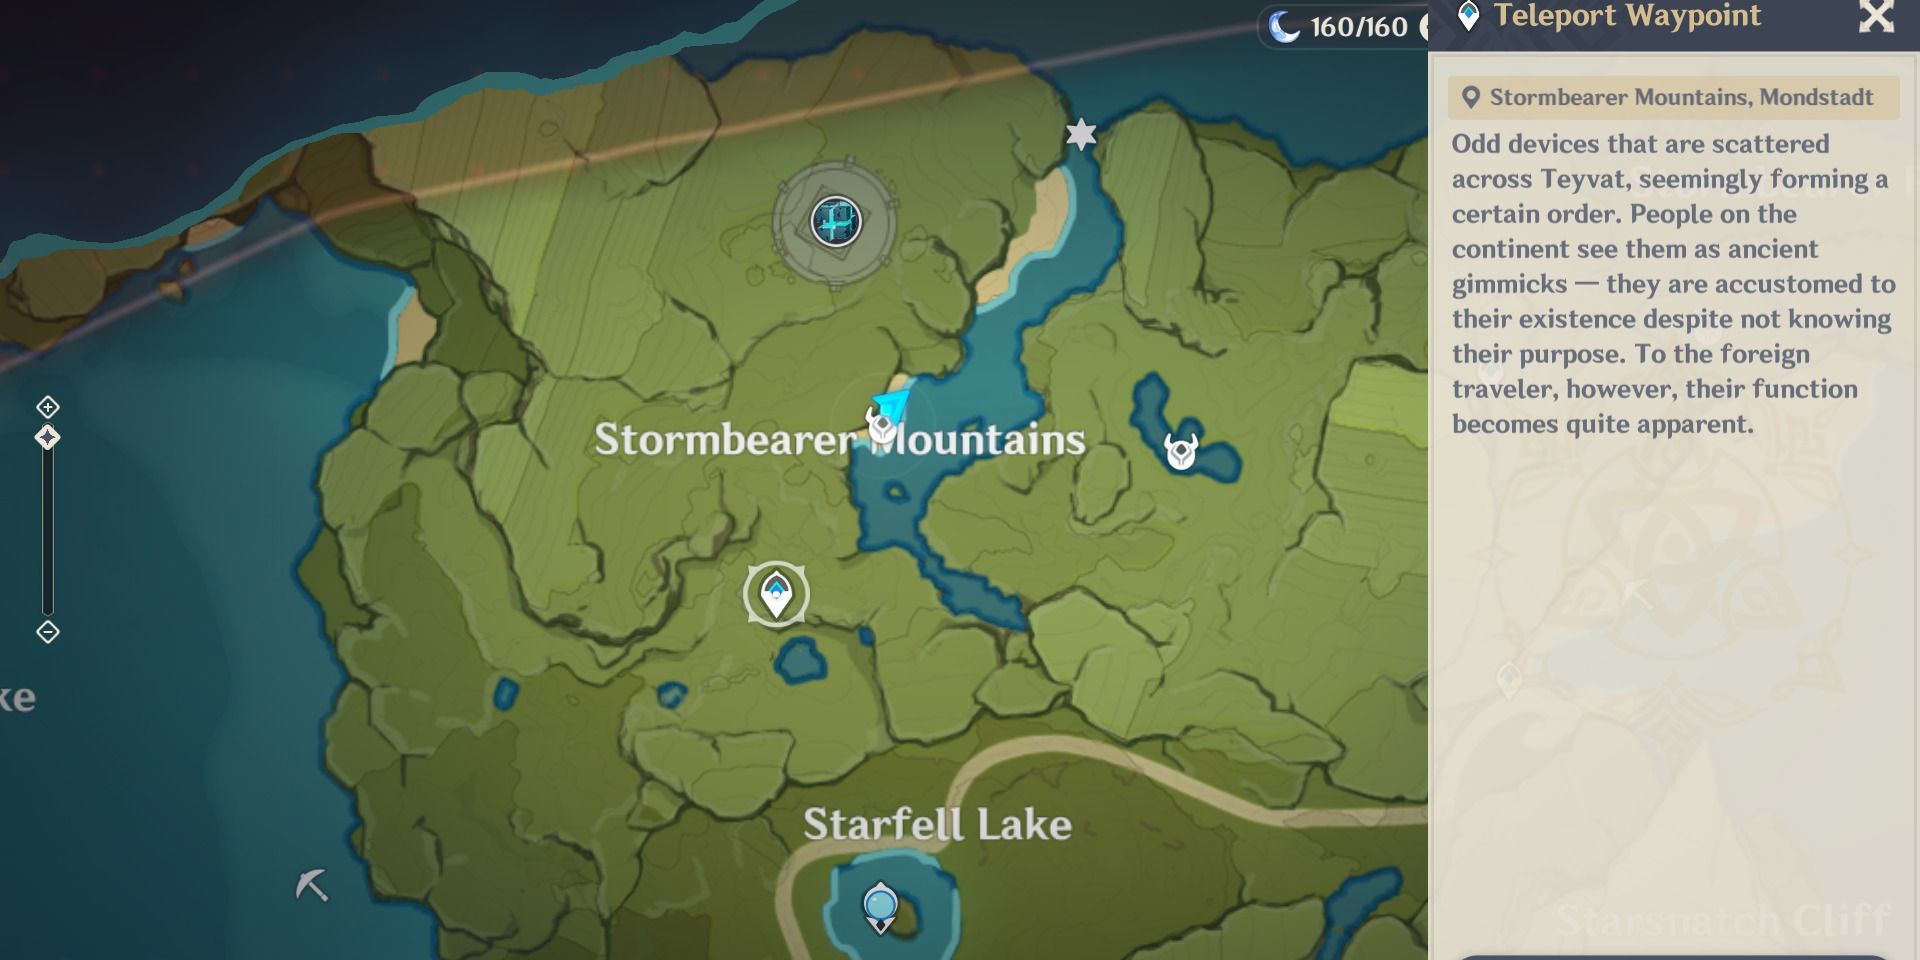 Image of the location on the Snapdragons map near the Stormbearer Mountains in Genshin Impact.